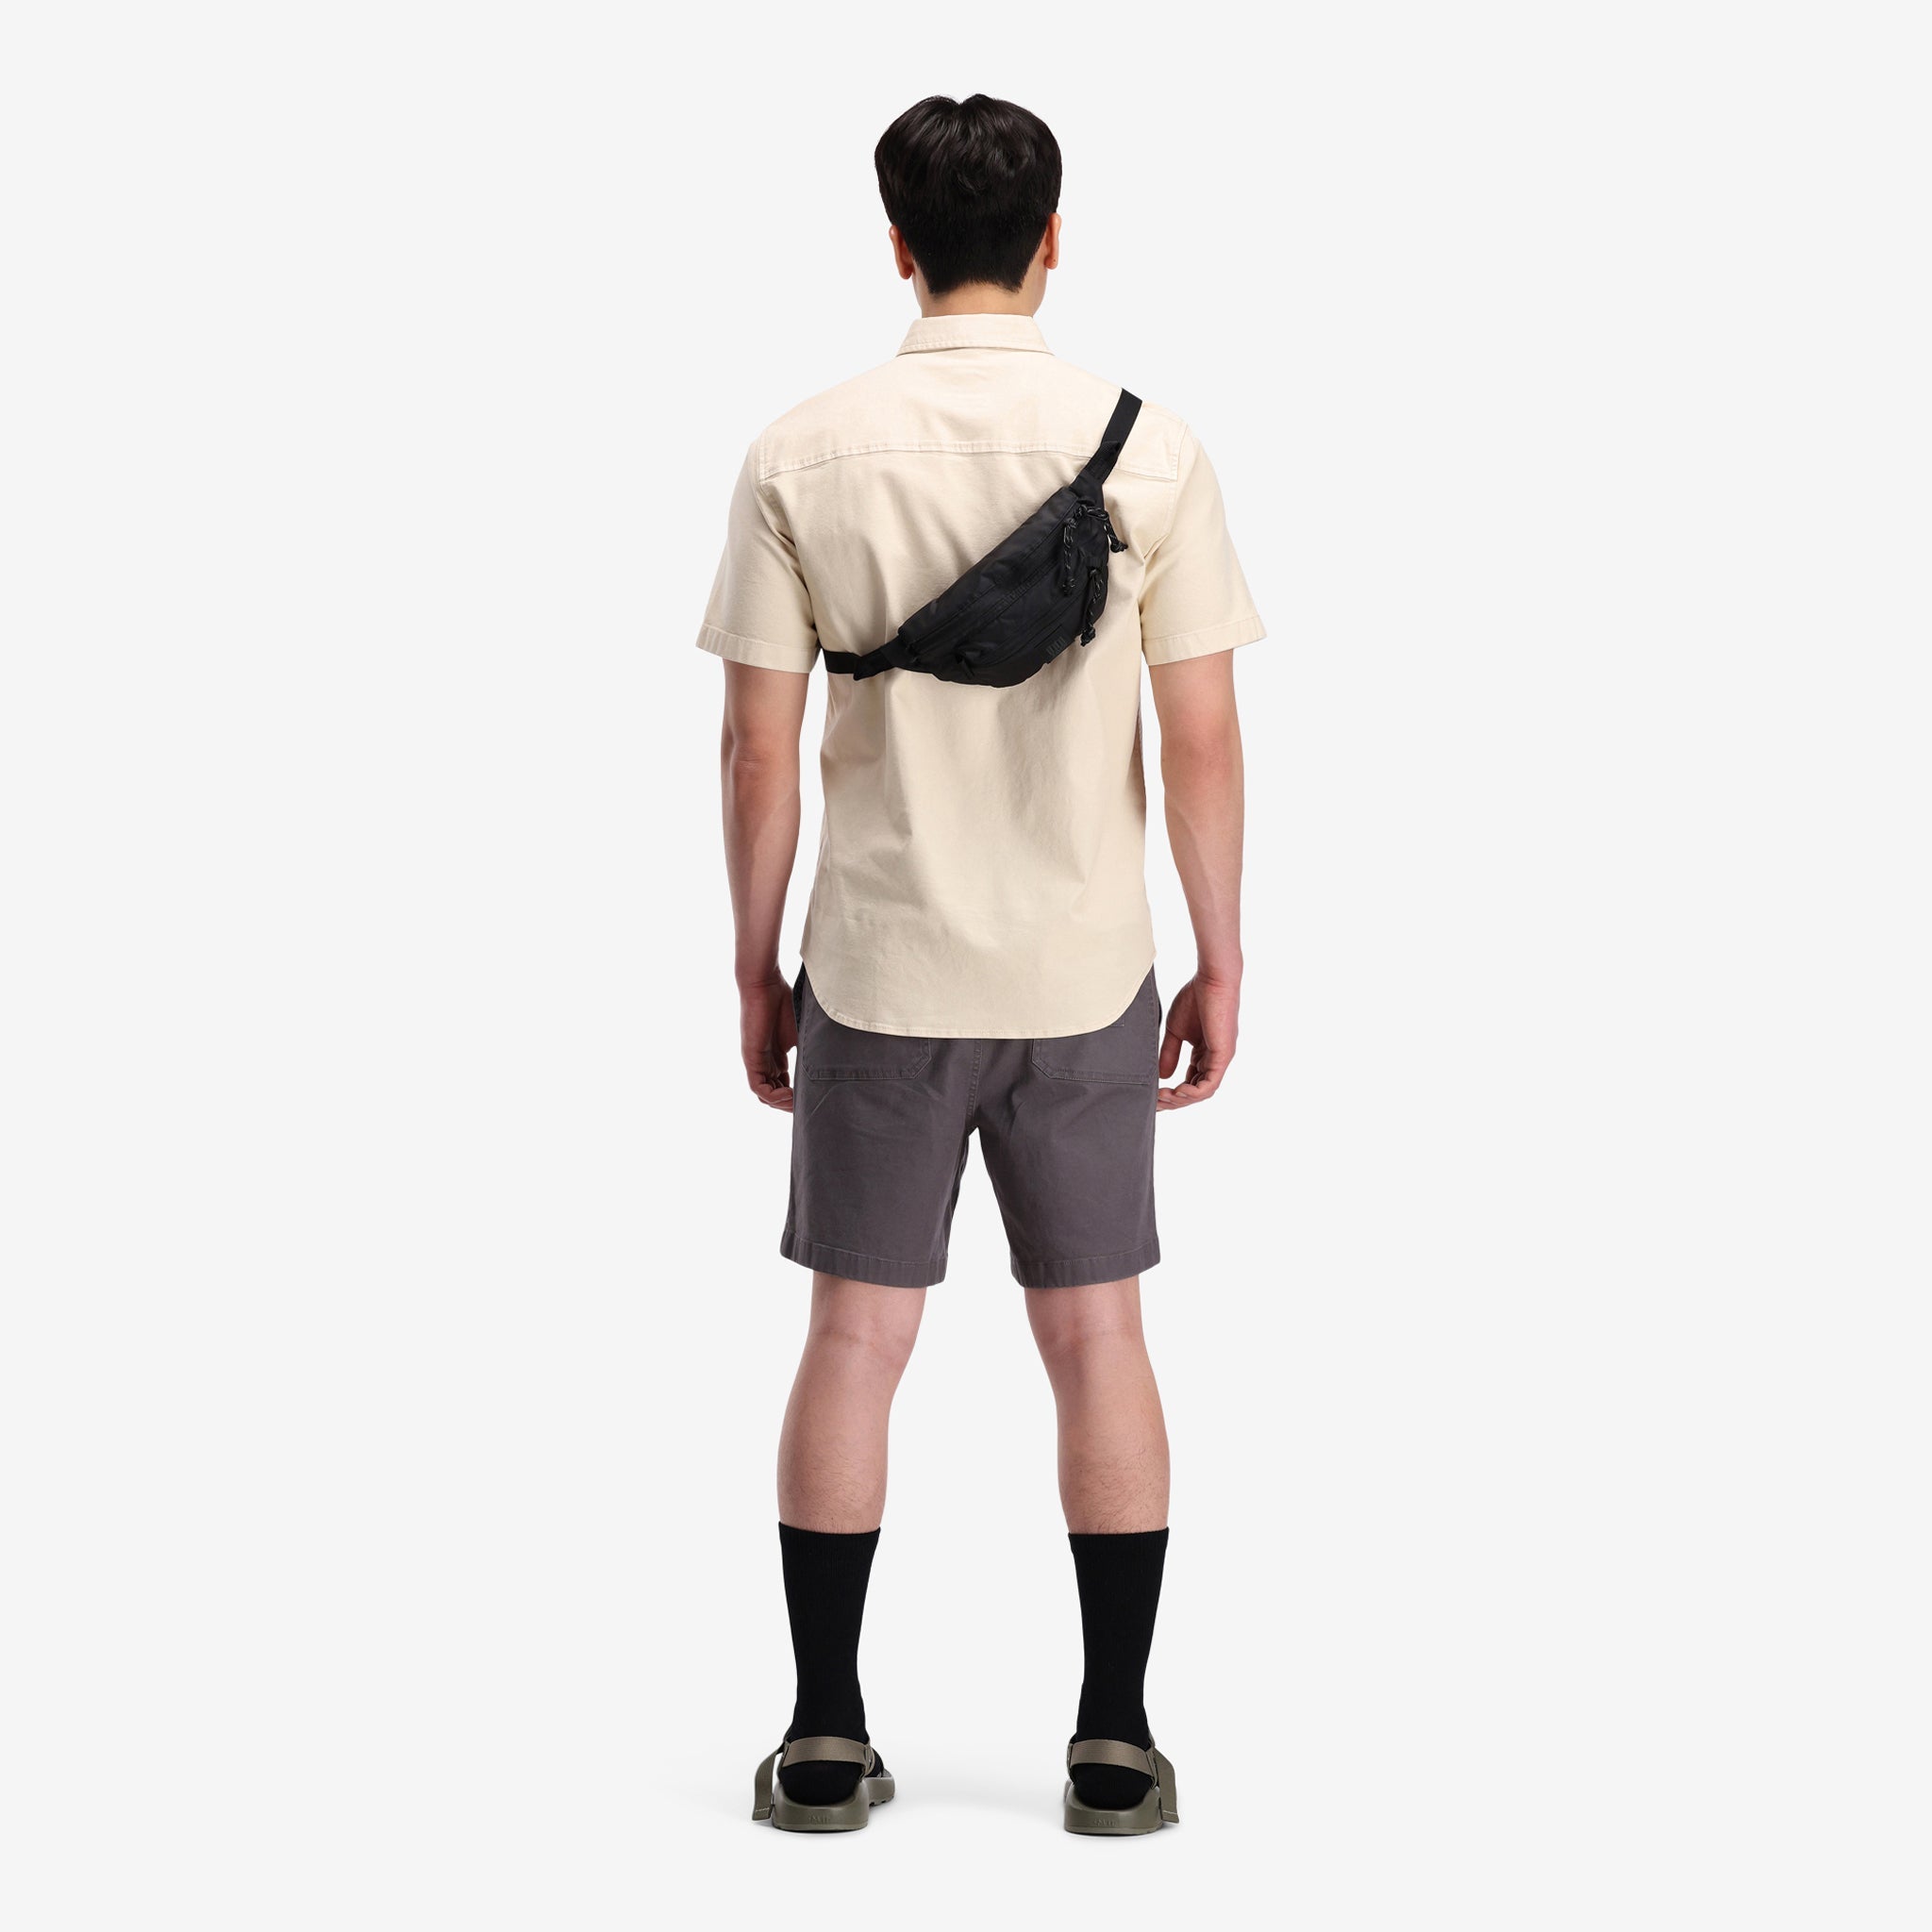 General on model shot, crossbody view of Topo Designs Mountain Waist Pack in lightweight recycled "Black / Black" nylon.